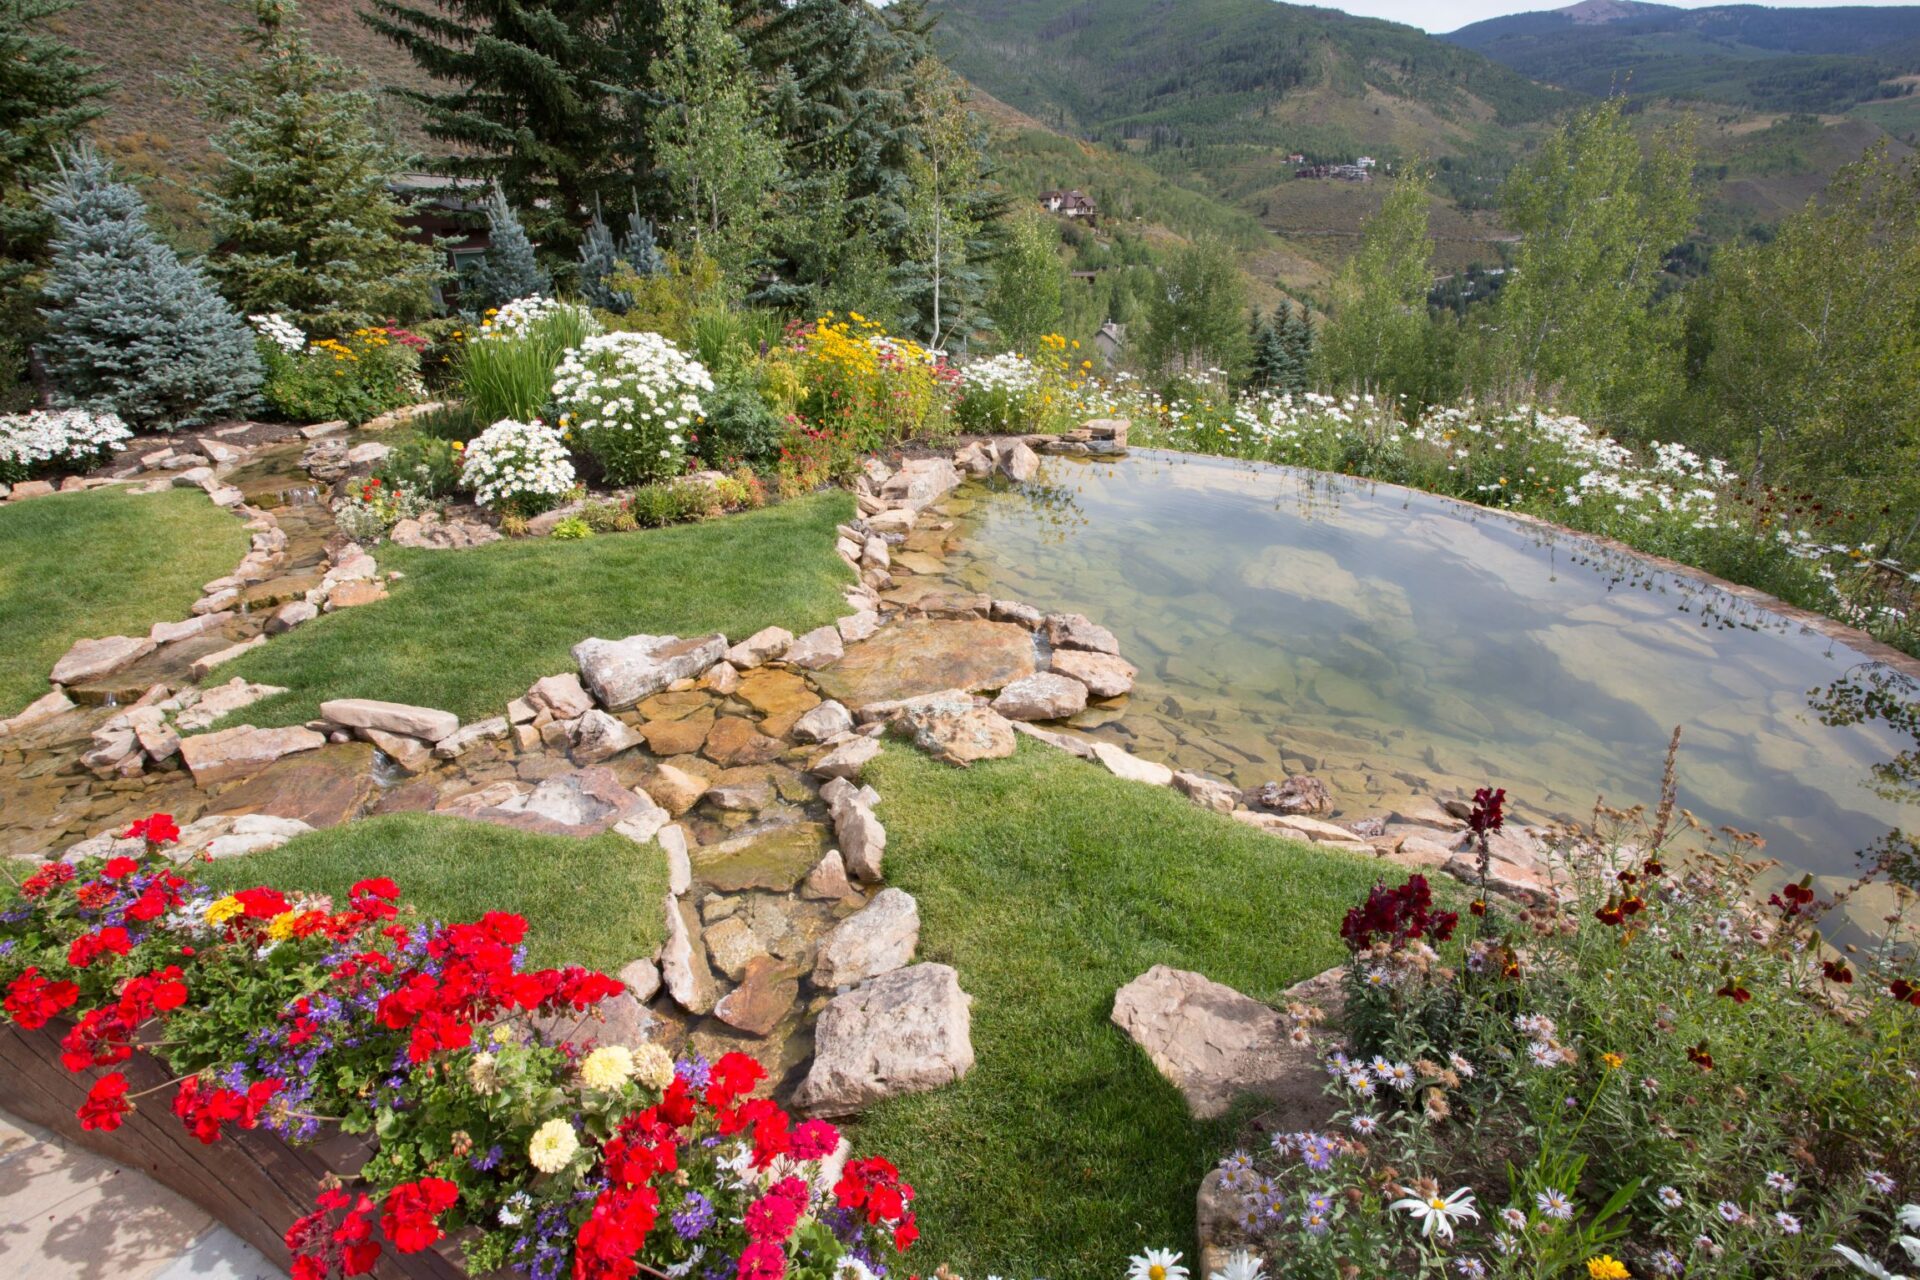 A serene garden with a natural stone-edged pond surrounded by lush greenery, colorful flowers, and a hilly landscape in the background.